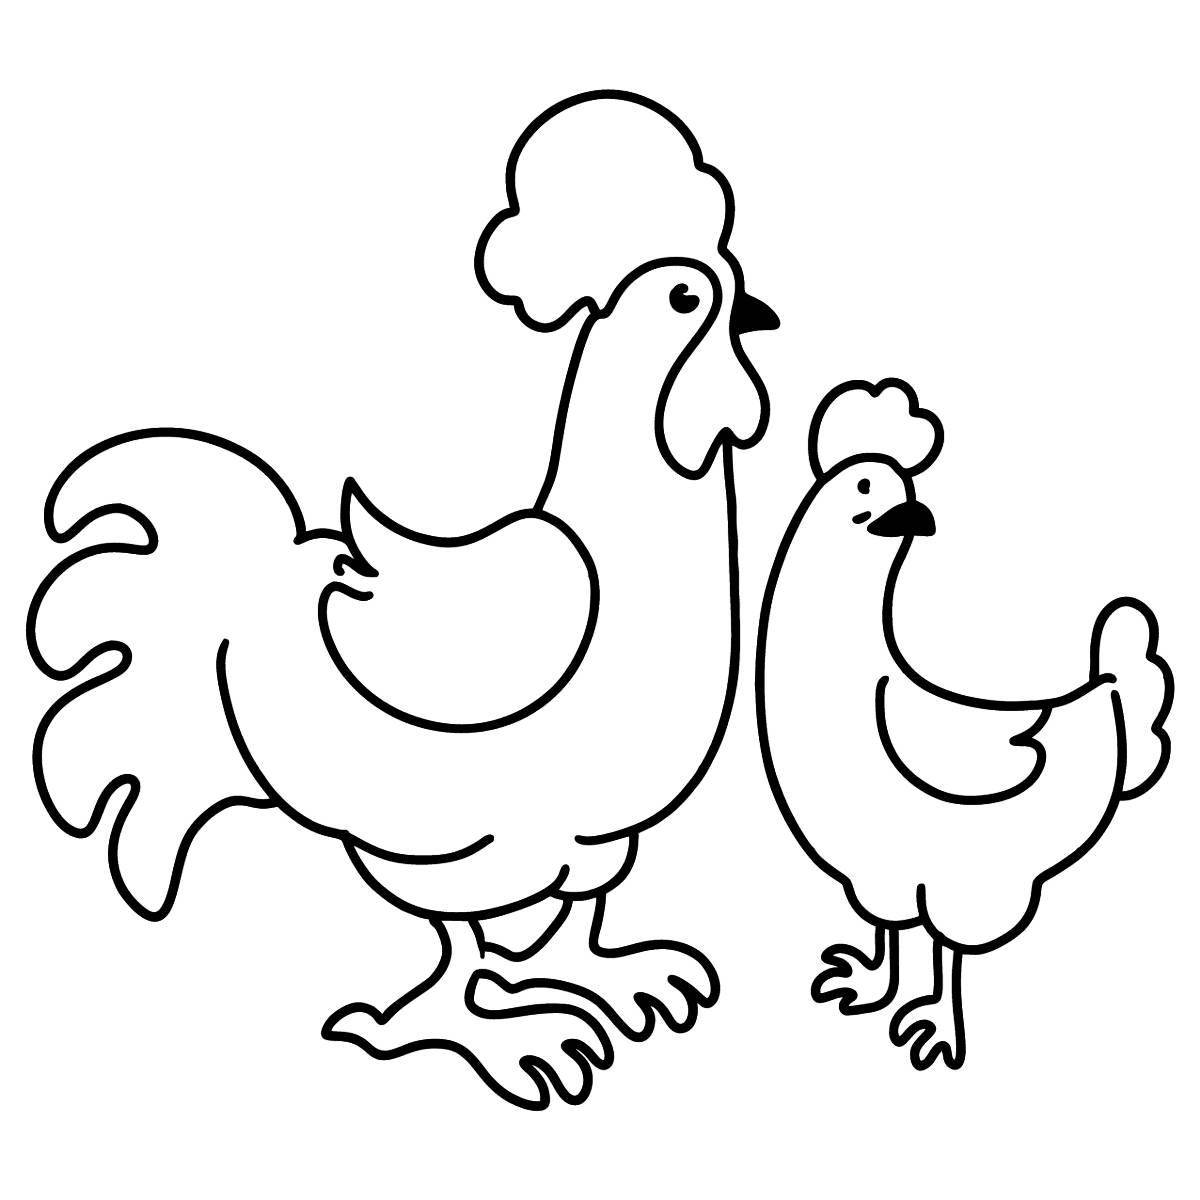 Colorful cockerel coloring book for kids 2-3 years old